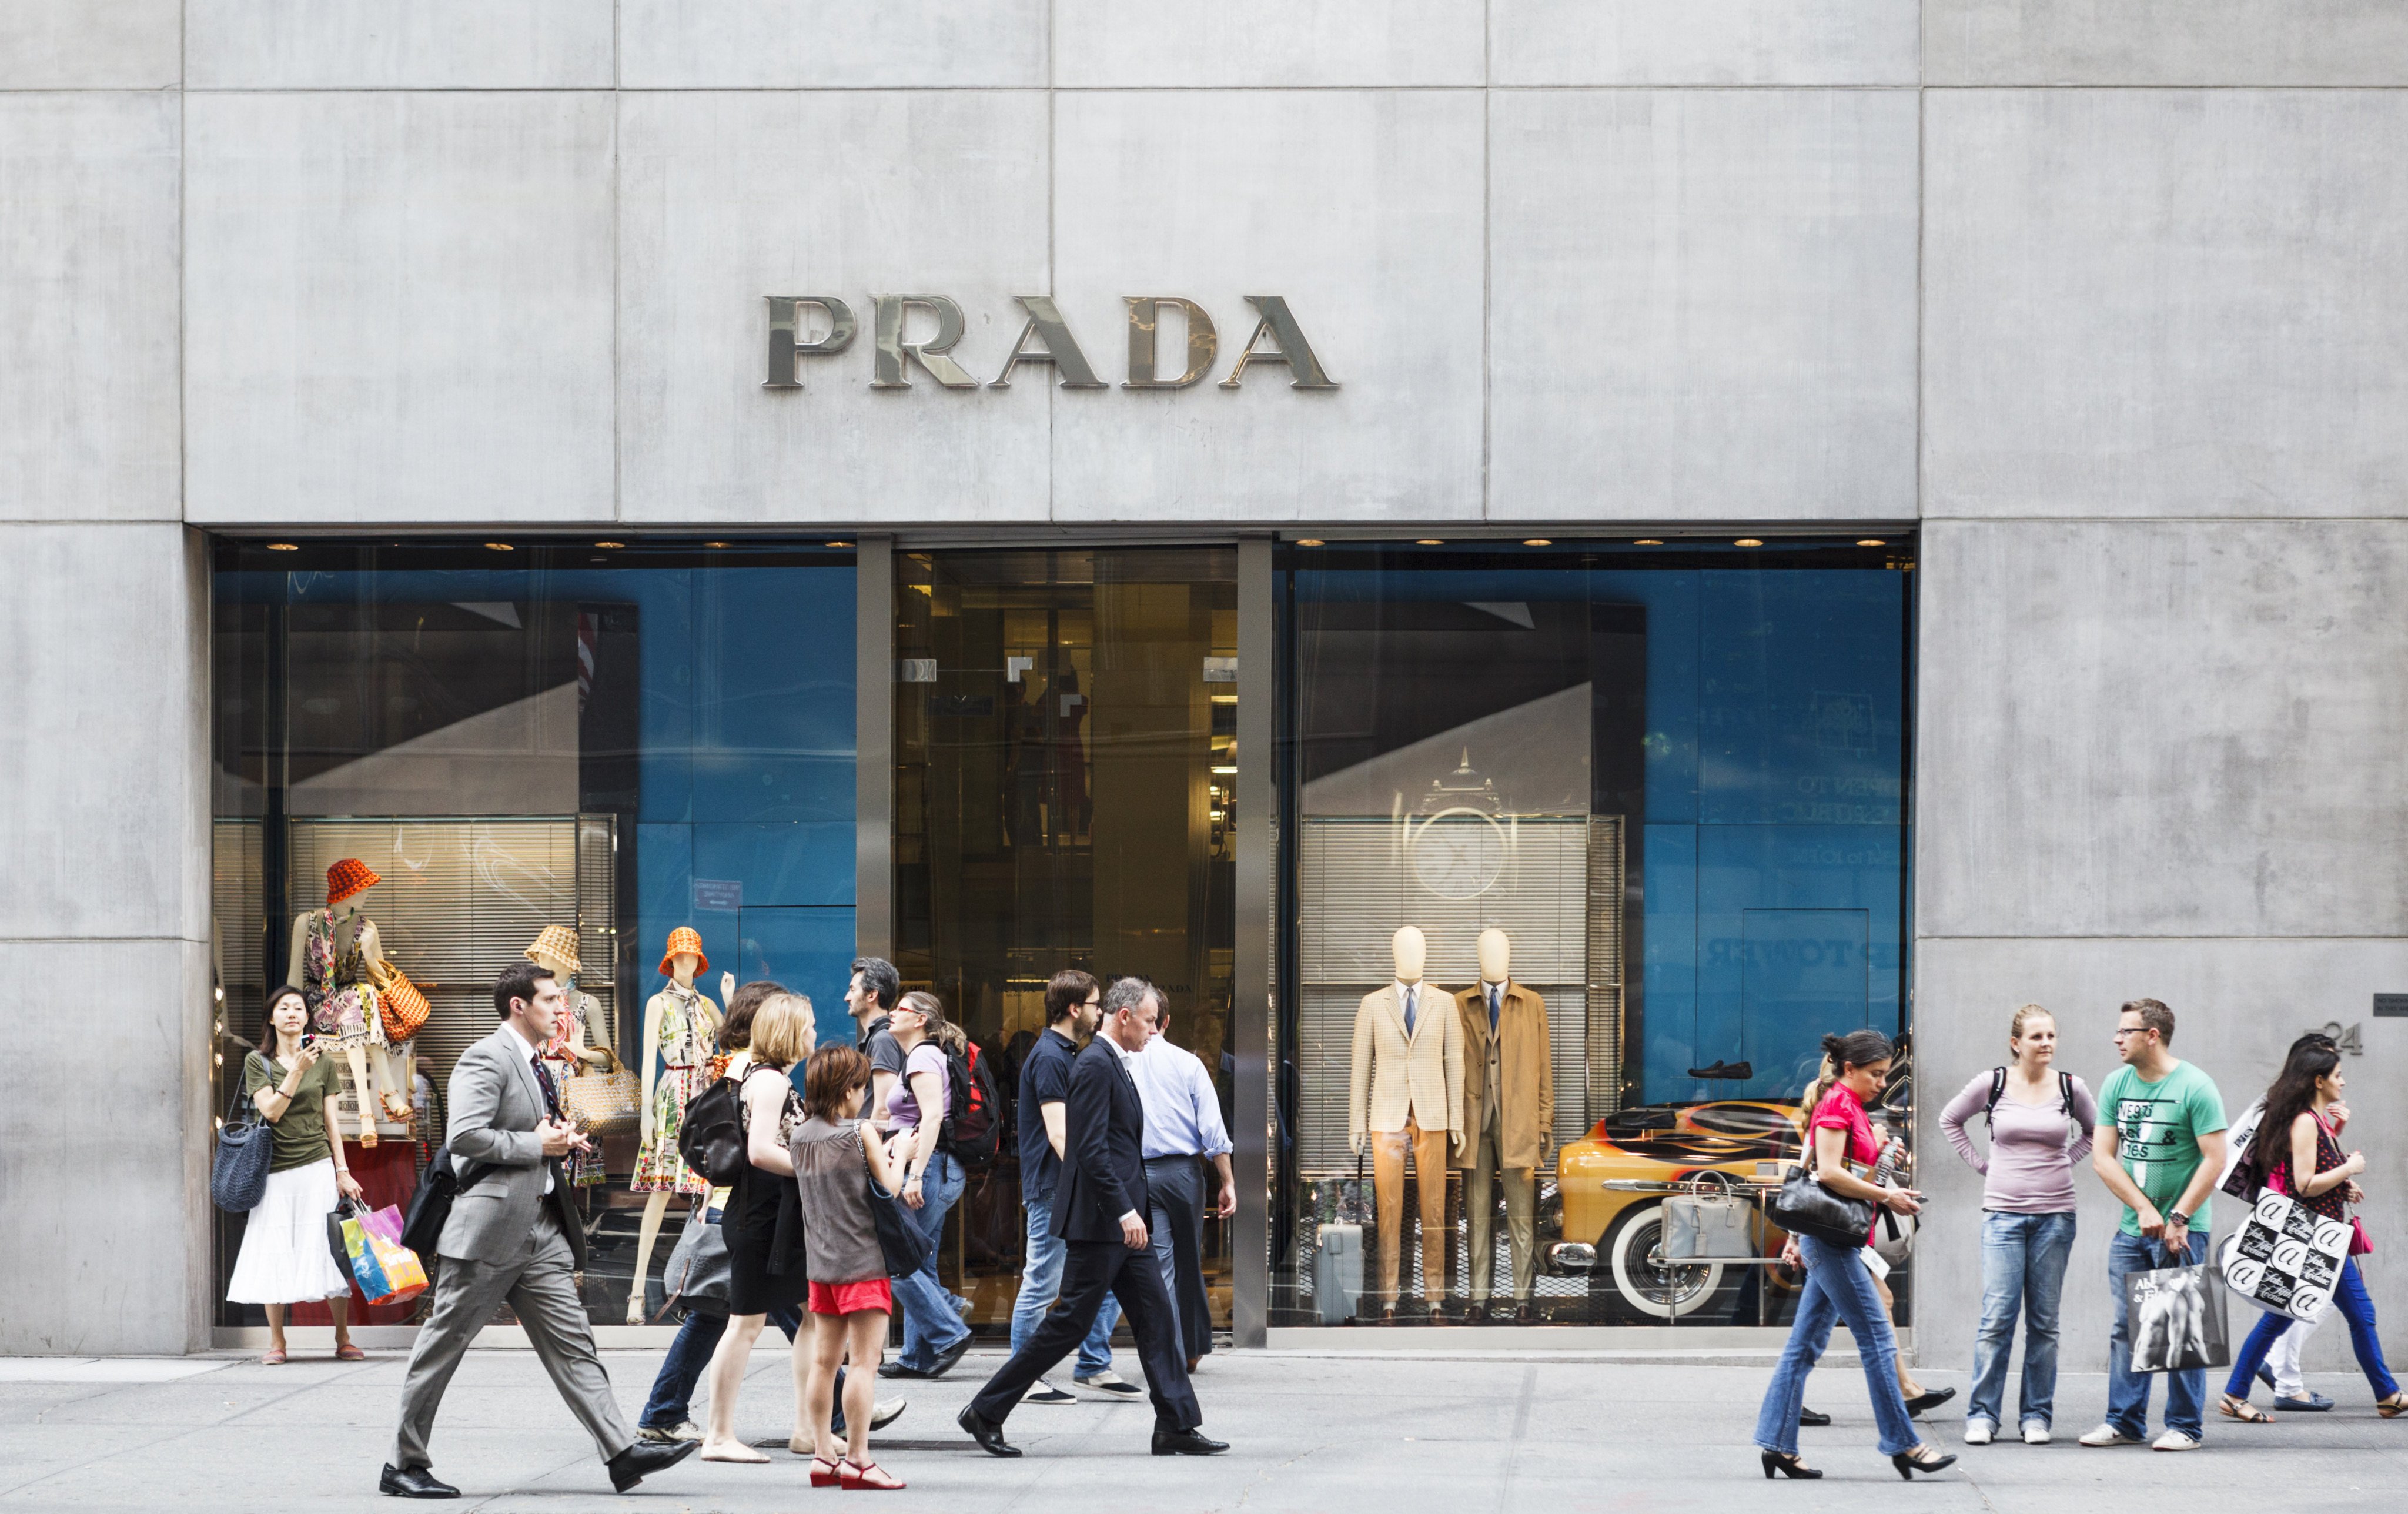 Hong Kong-listed Prada acquires Fifth Avenue building home to New